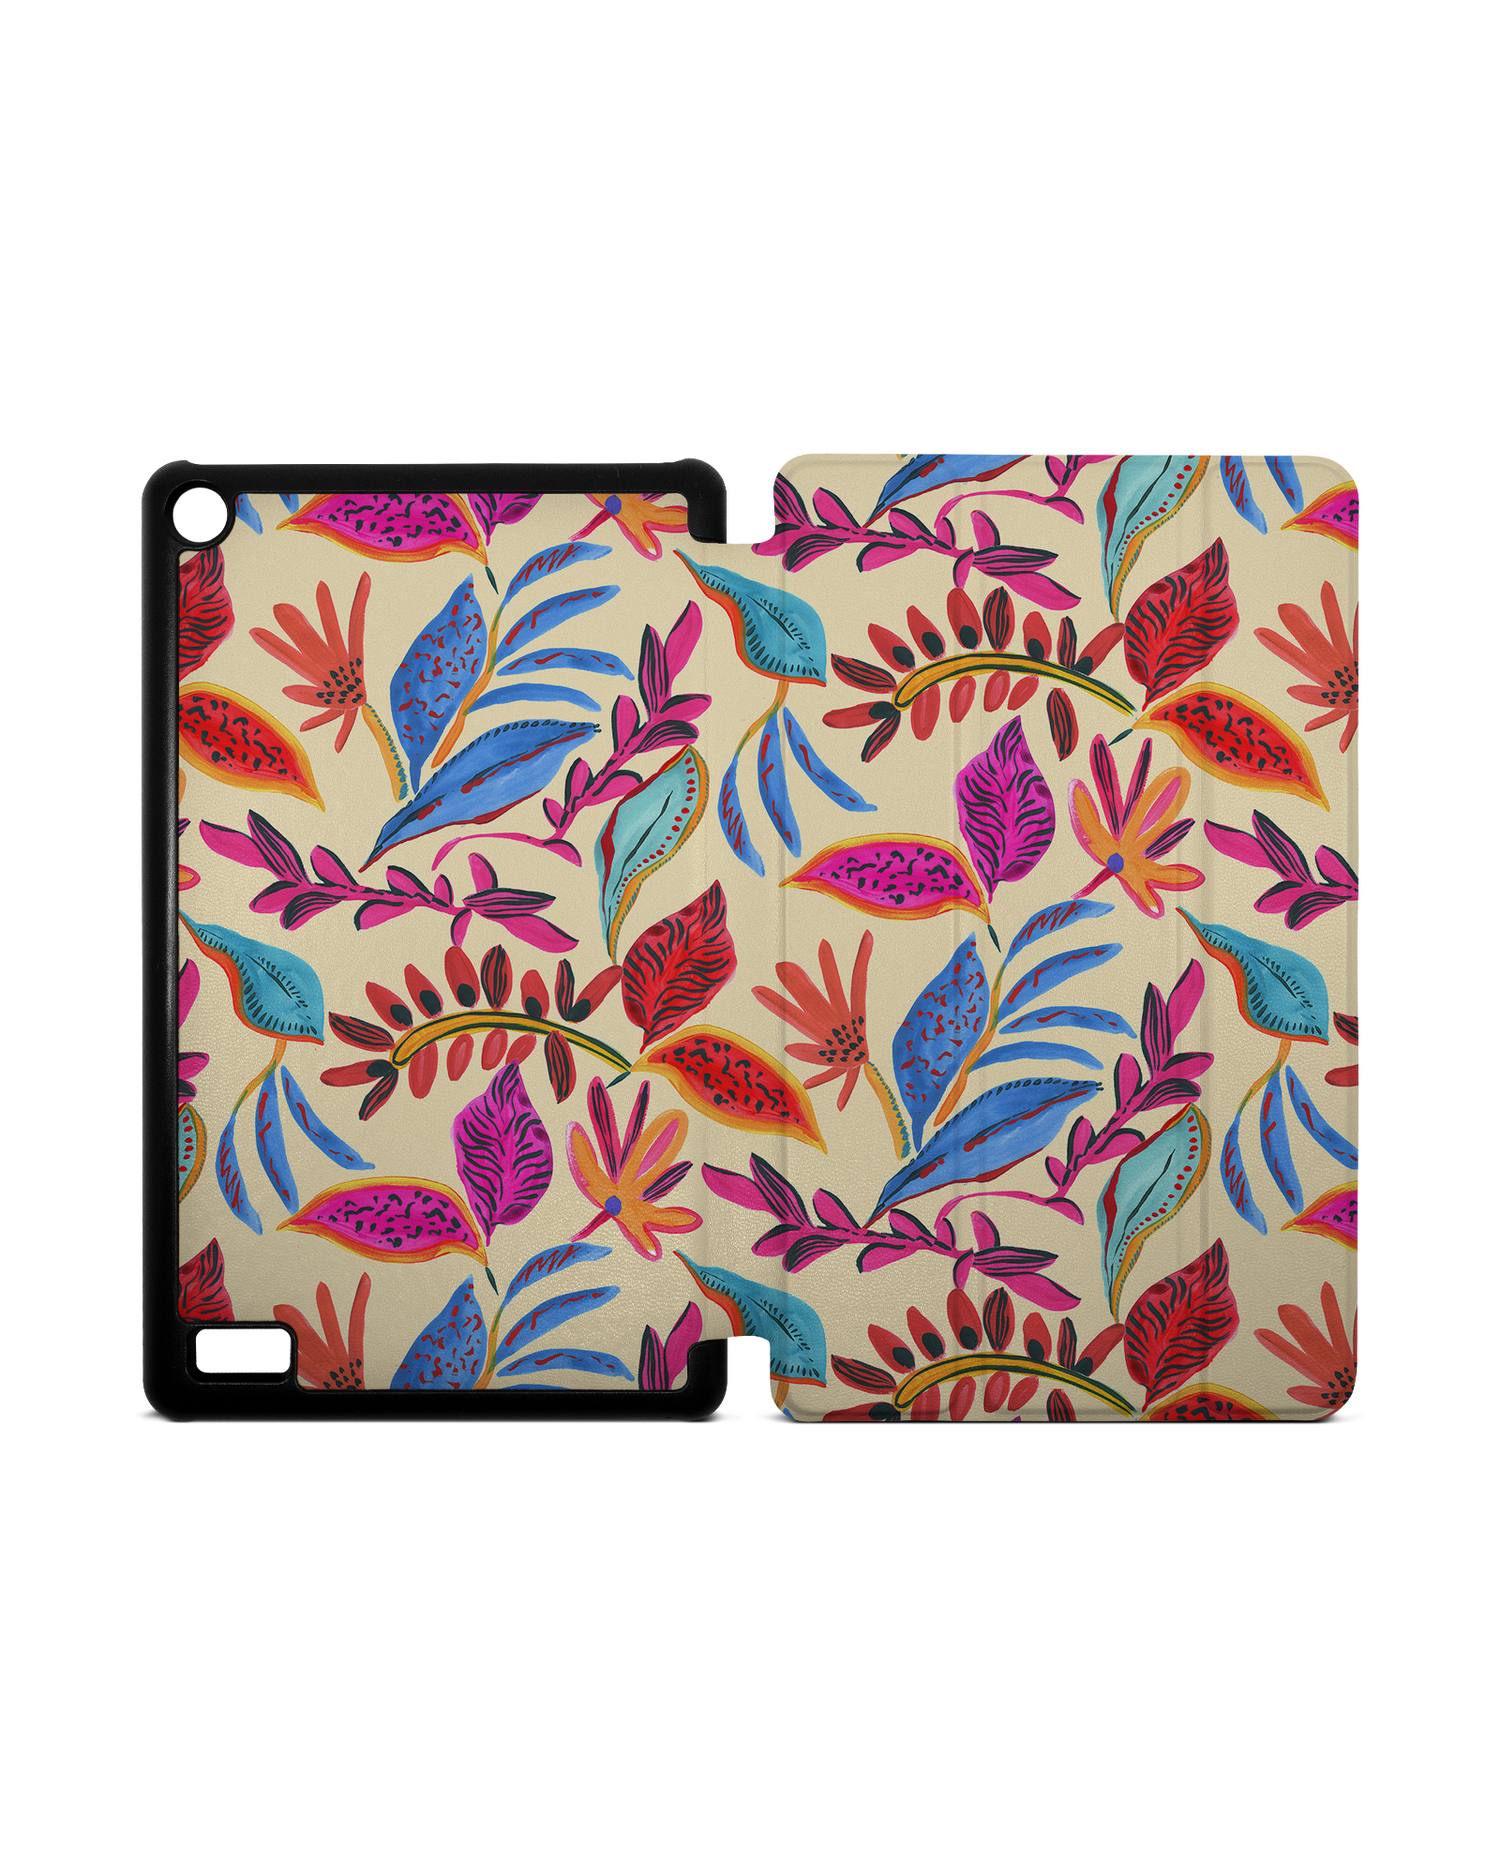 Painterly Spring Leaves Tablet Smart Case for Amazon Fire 7: Opened